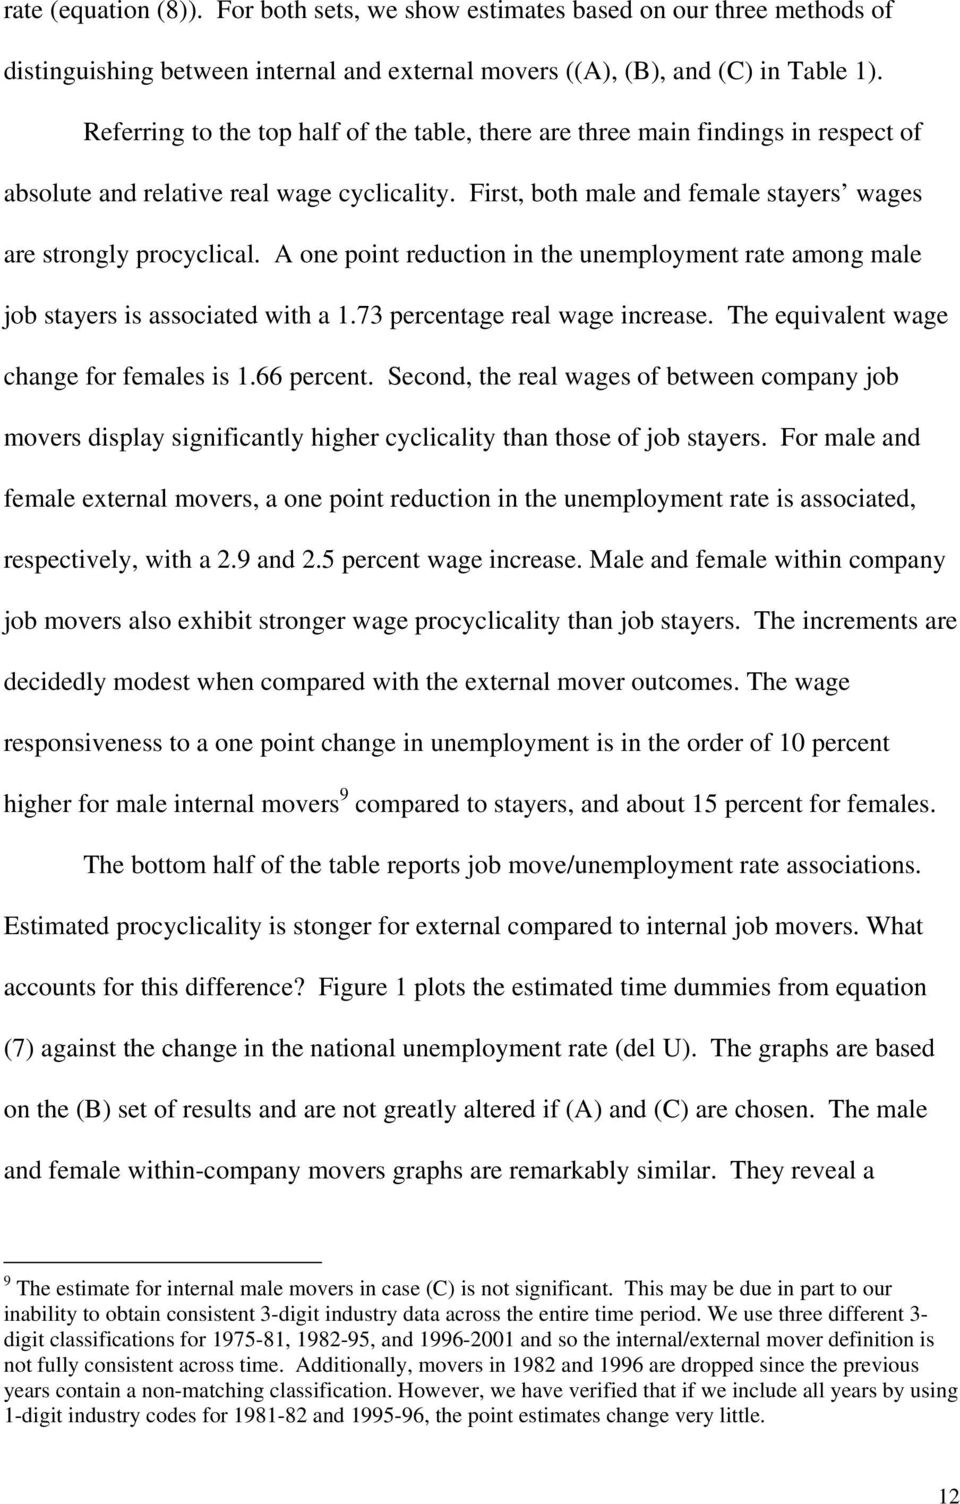 A one point reduction in the unemployment rate among male job stayers is associated with a 1.73 percentage real wage increase. The equivalent wage change for females is 1.66 percent.